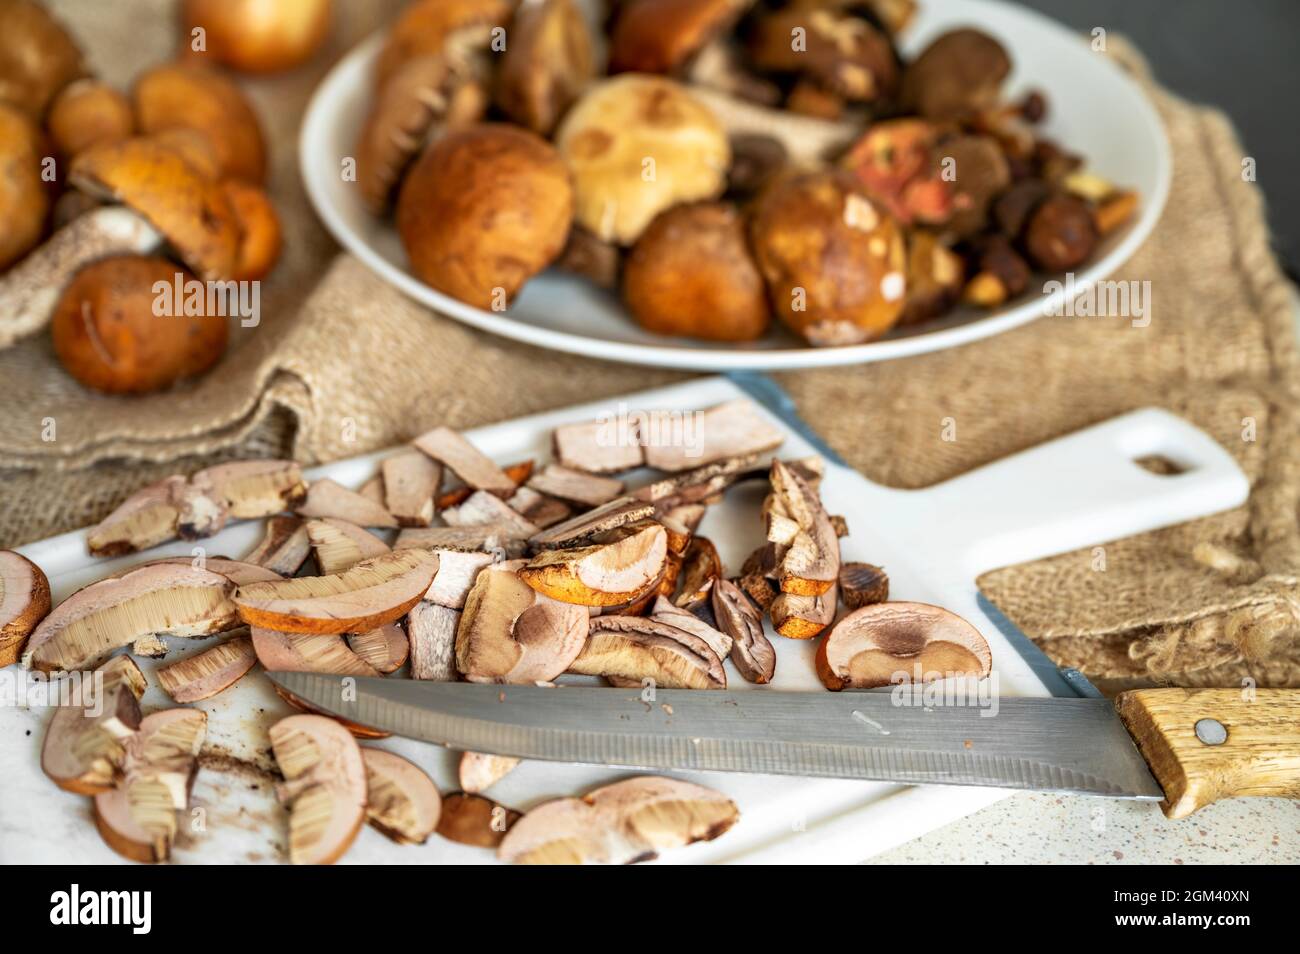 Heap of orange head forest mushroom (fungi Leccinum) on plate and sliced on kitchen board. Stock Photo